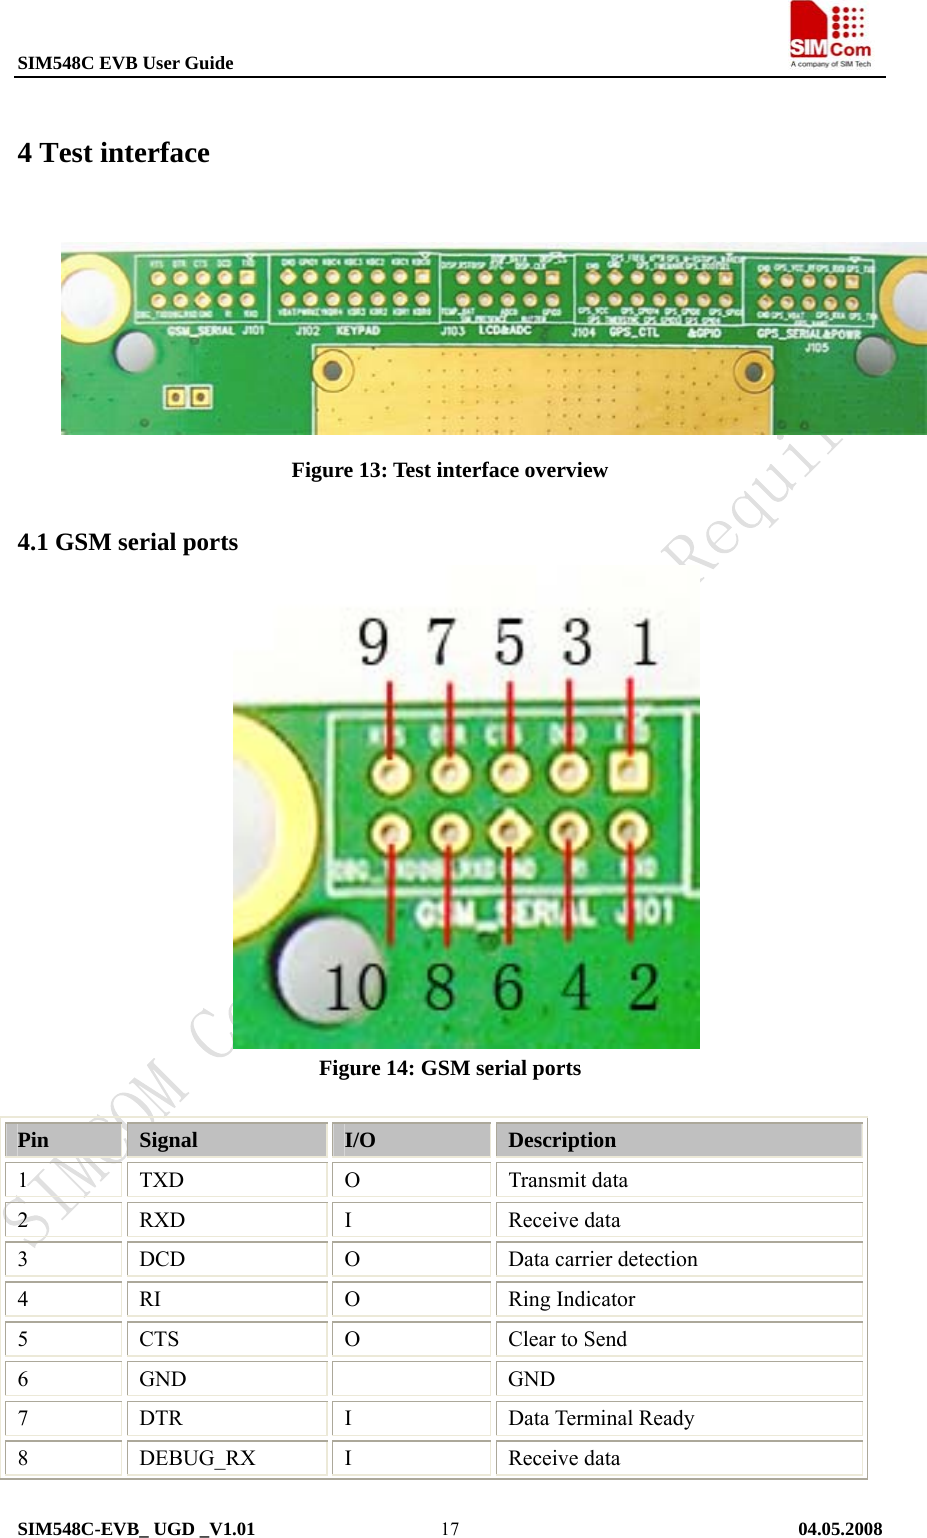 SIM548C EVB User Guide                                                             SIM548C-EVB_ UGD _V1.01   04.05.2008   174 Test interface        Figure 13: Test interface overview 4.1 GSM serial ports                 Figure 14: GSM serial ports  Pin  Signal  I/O  Description 1 TXD  O Transmit data 2 RXD  I Receive data 3 DCD  O Data carrier detection 4 RI  O Ring Indicator 5 CTS  O Clear to Send 6 GND    GND 7 DTR  I Data Terminal Ready 8 DEBUG_RX I  Receive data 